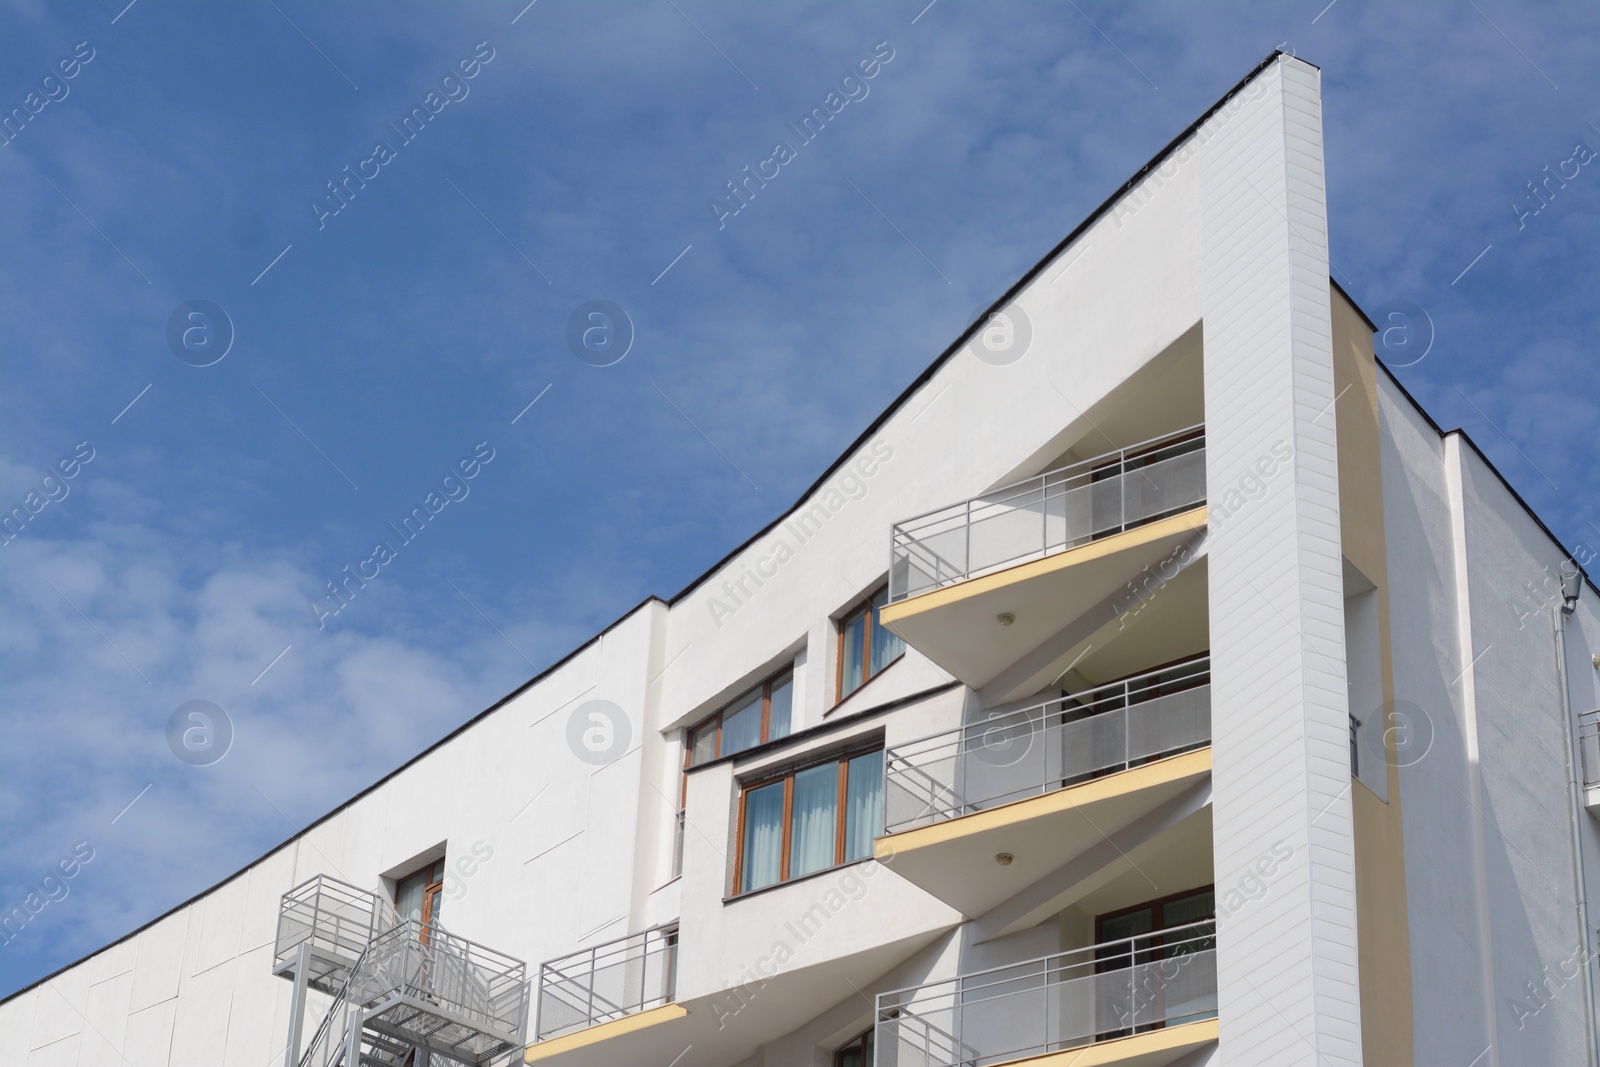 Photo of Exterior of beautiful building with balconies against blue sky, space for text